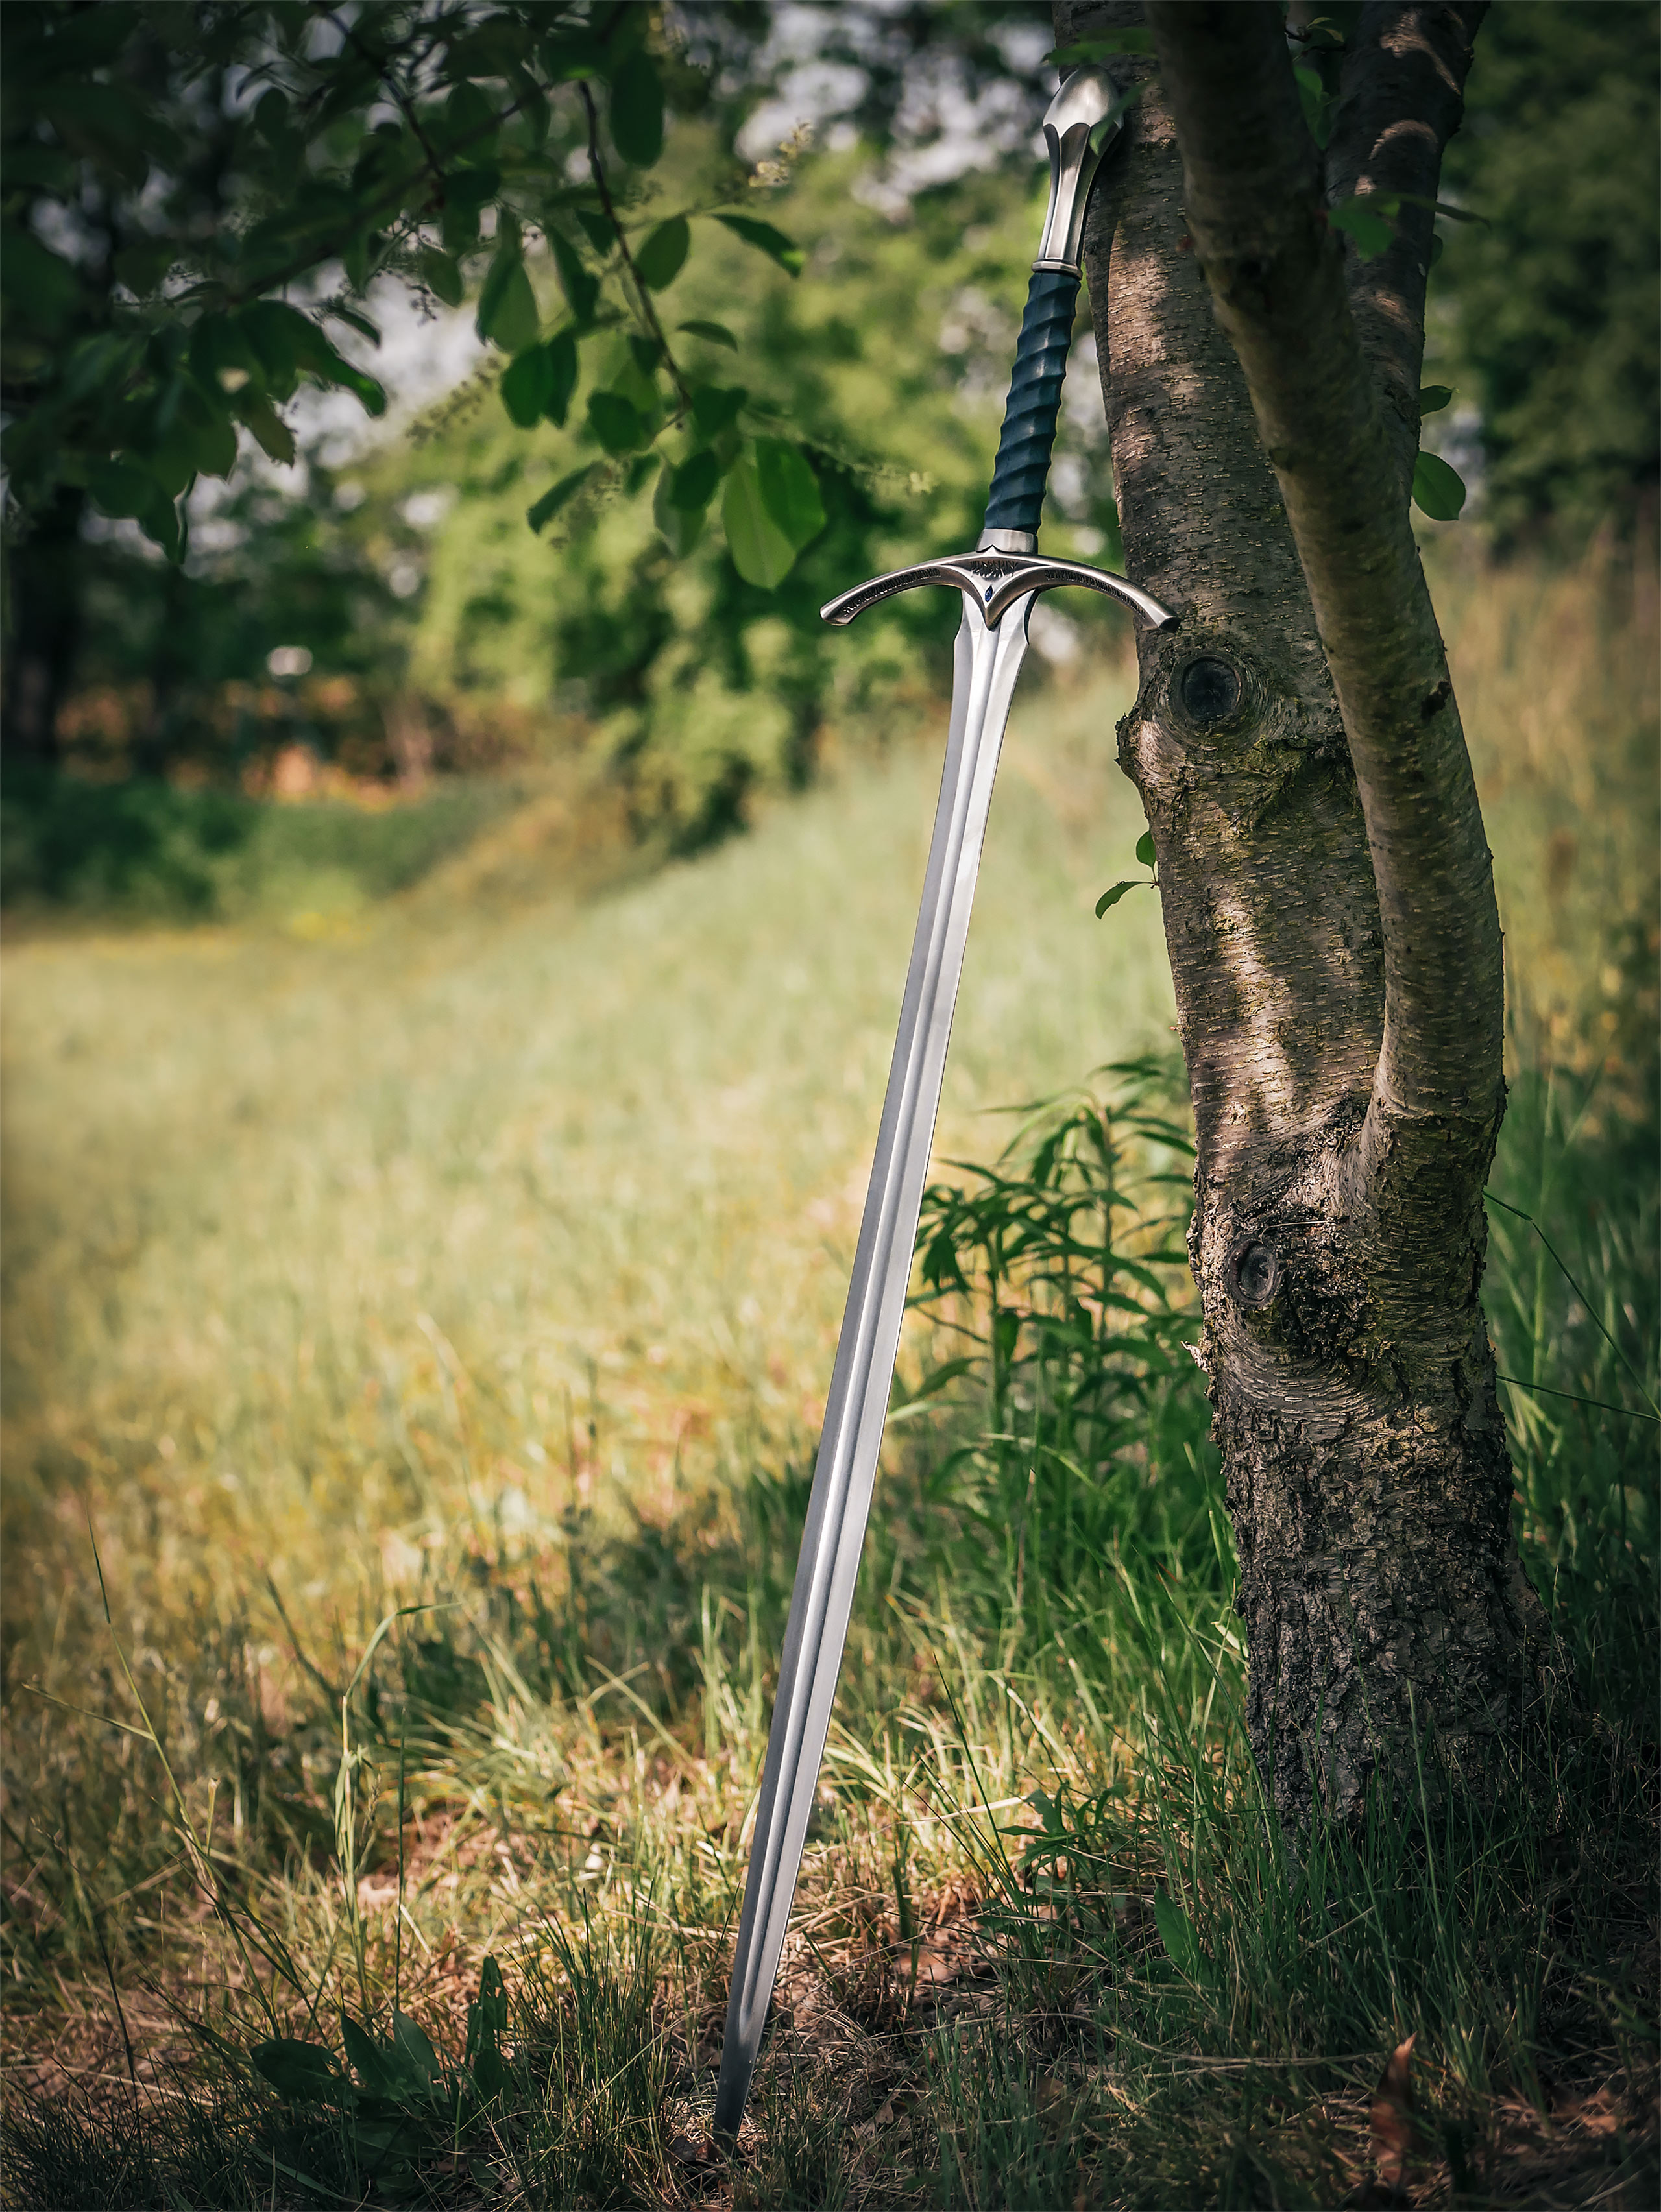 Gandalf's Glamdring Sword Replica - Lord of the Rings